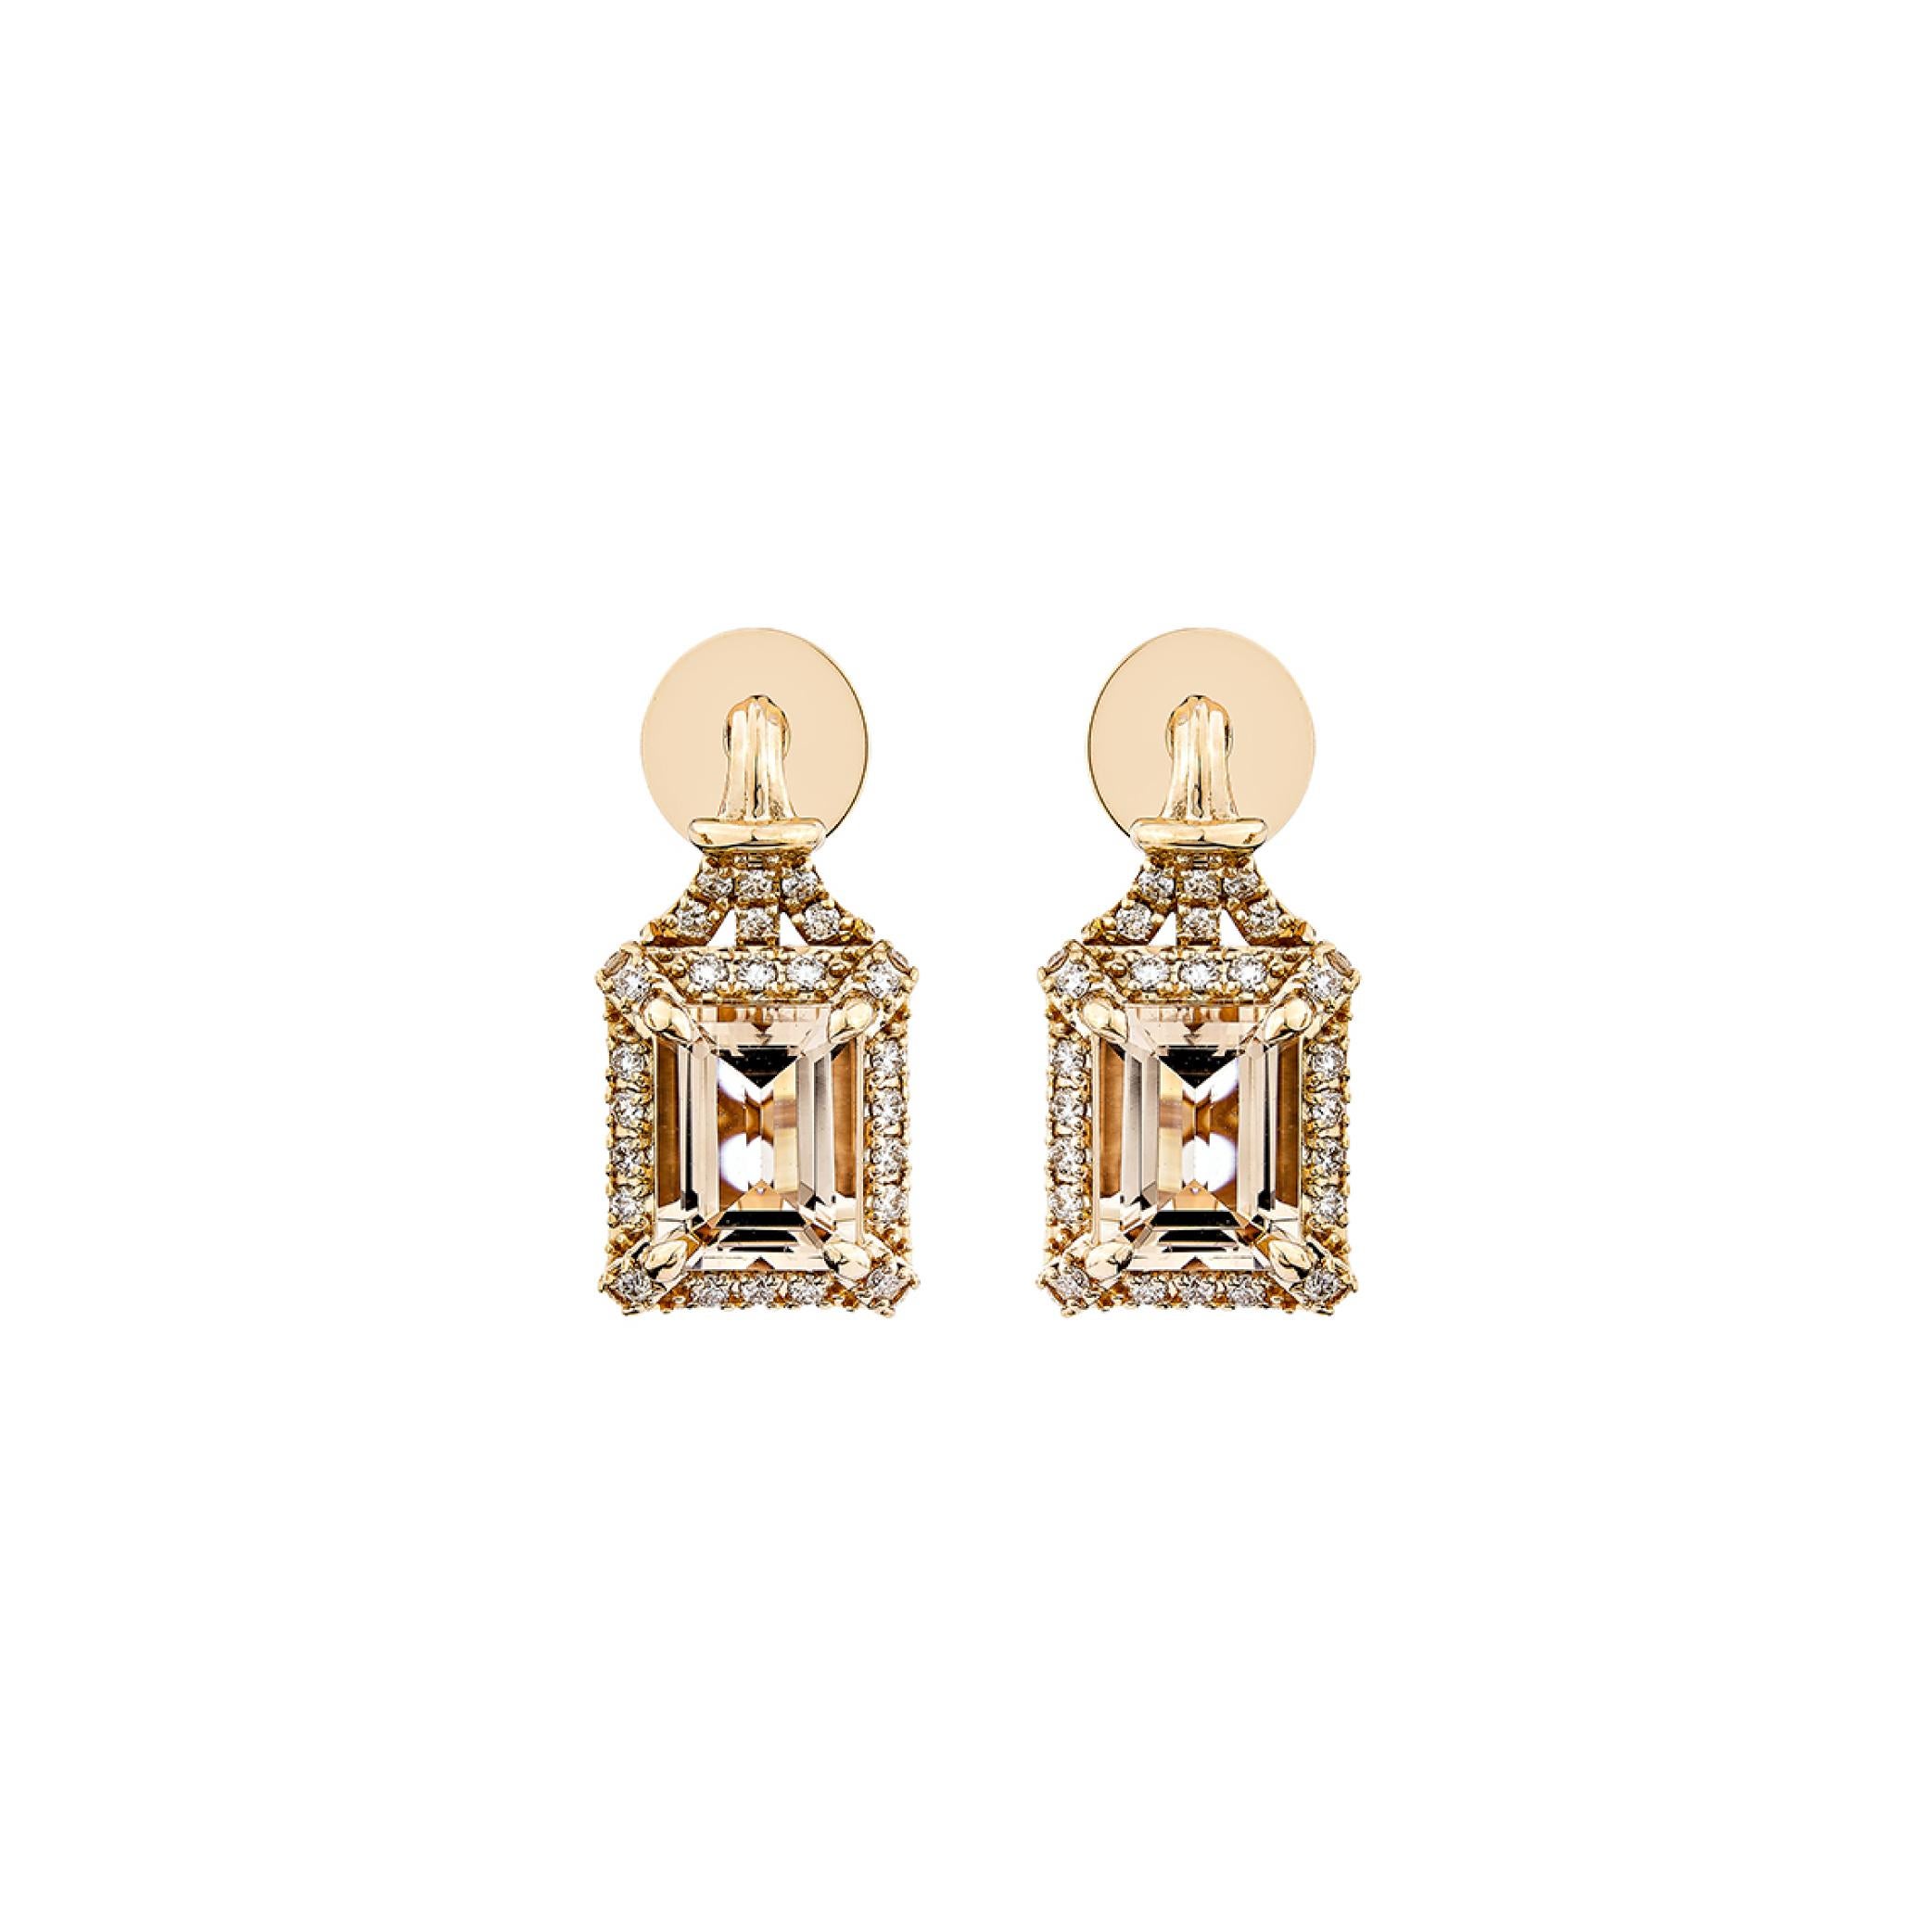 Contemporary 2.56 Carat Morganite Drop Earring in 18Karat Rose Gold with White Diamond. For Sale